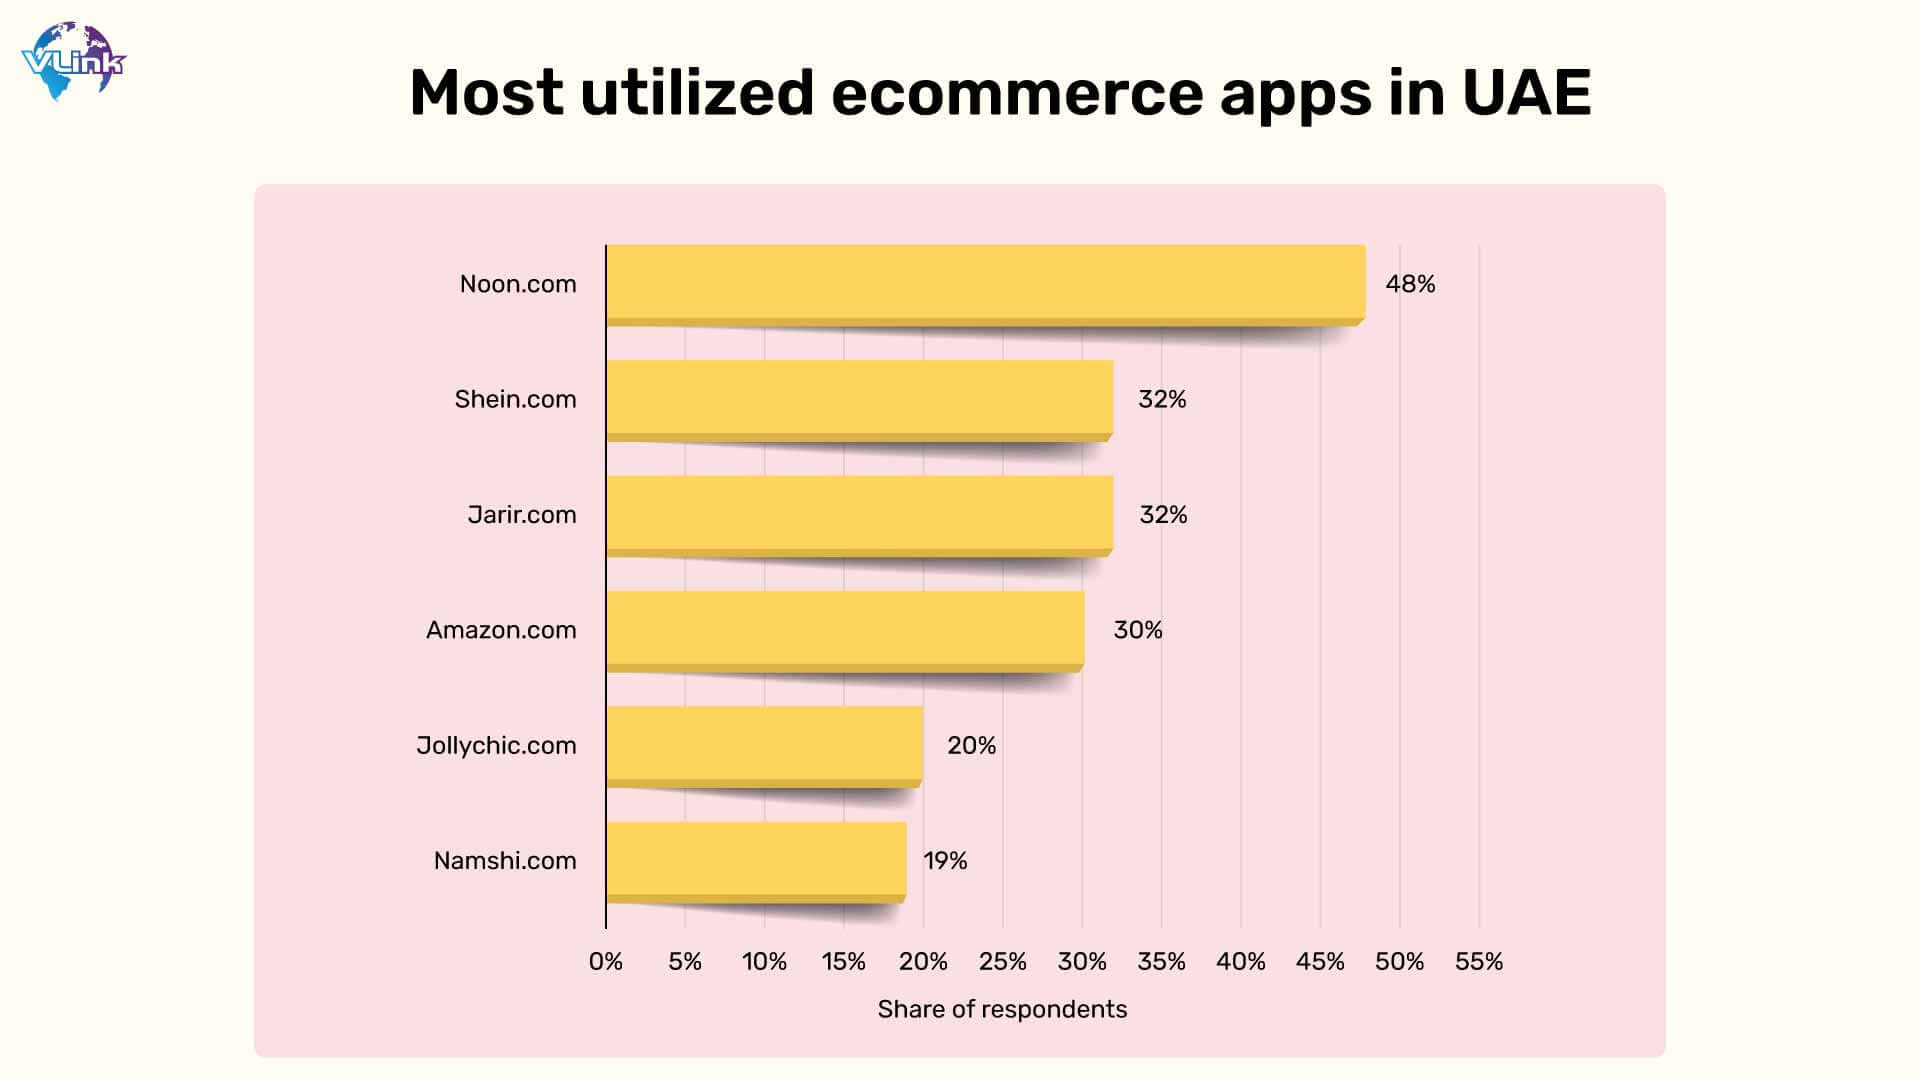 Most utilized ecommerce apps in UAE